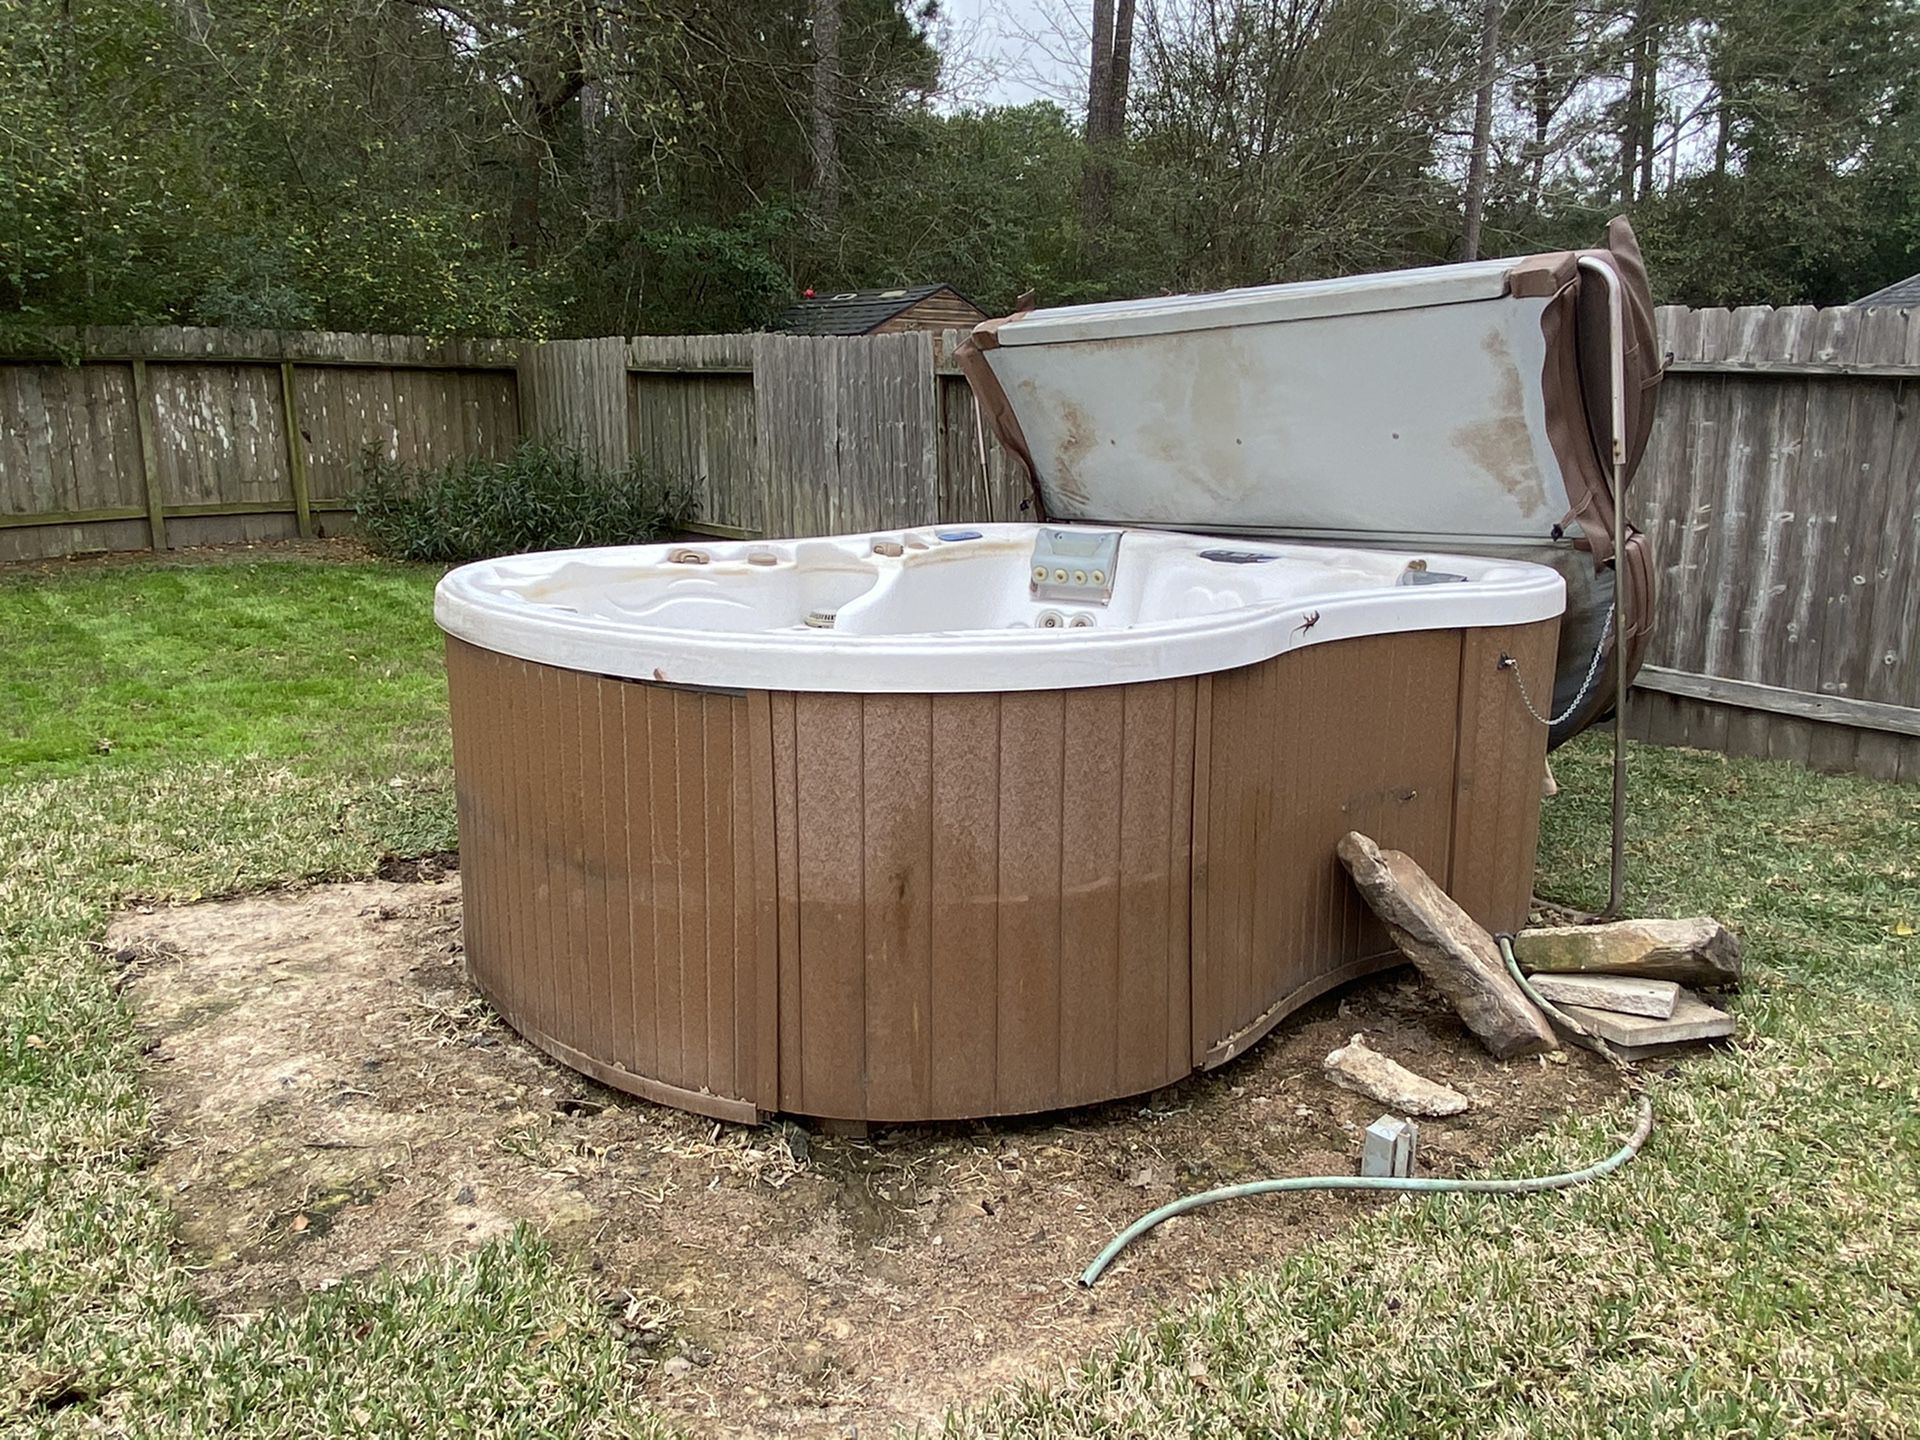 Spa hot tub / Dimension One 7-8 seats Multi color lights look great in white tub. Numerous fountain settings. Comes with fold over cover. It is not w